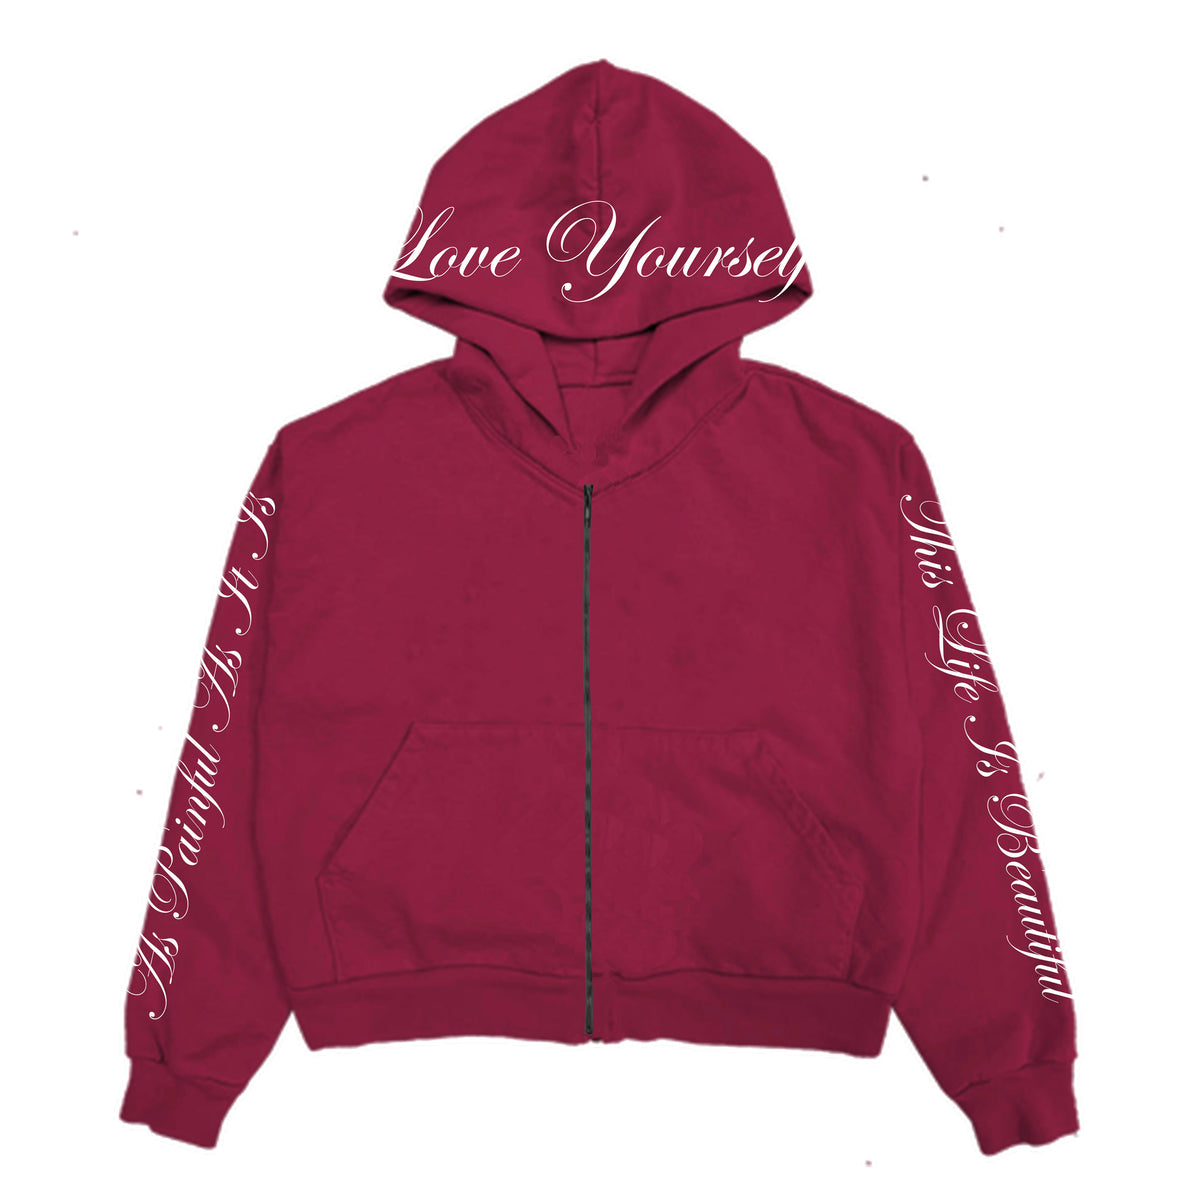 LOVE YOURSELF EMBROIDERED ZIP-UP - BURGUNDY